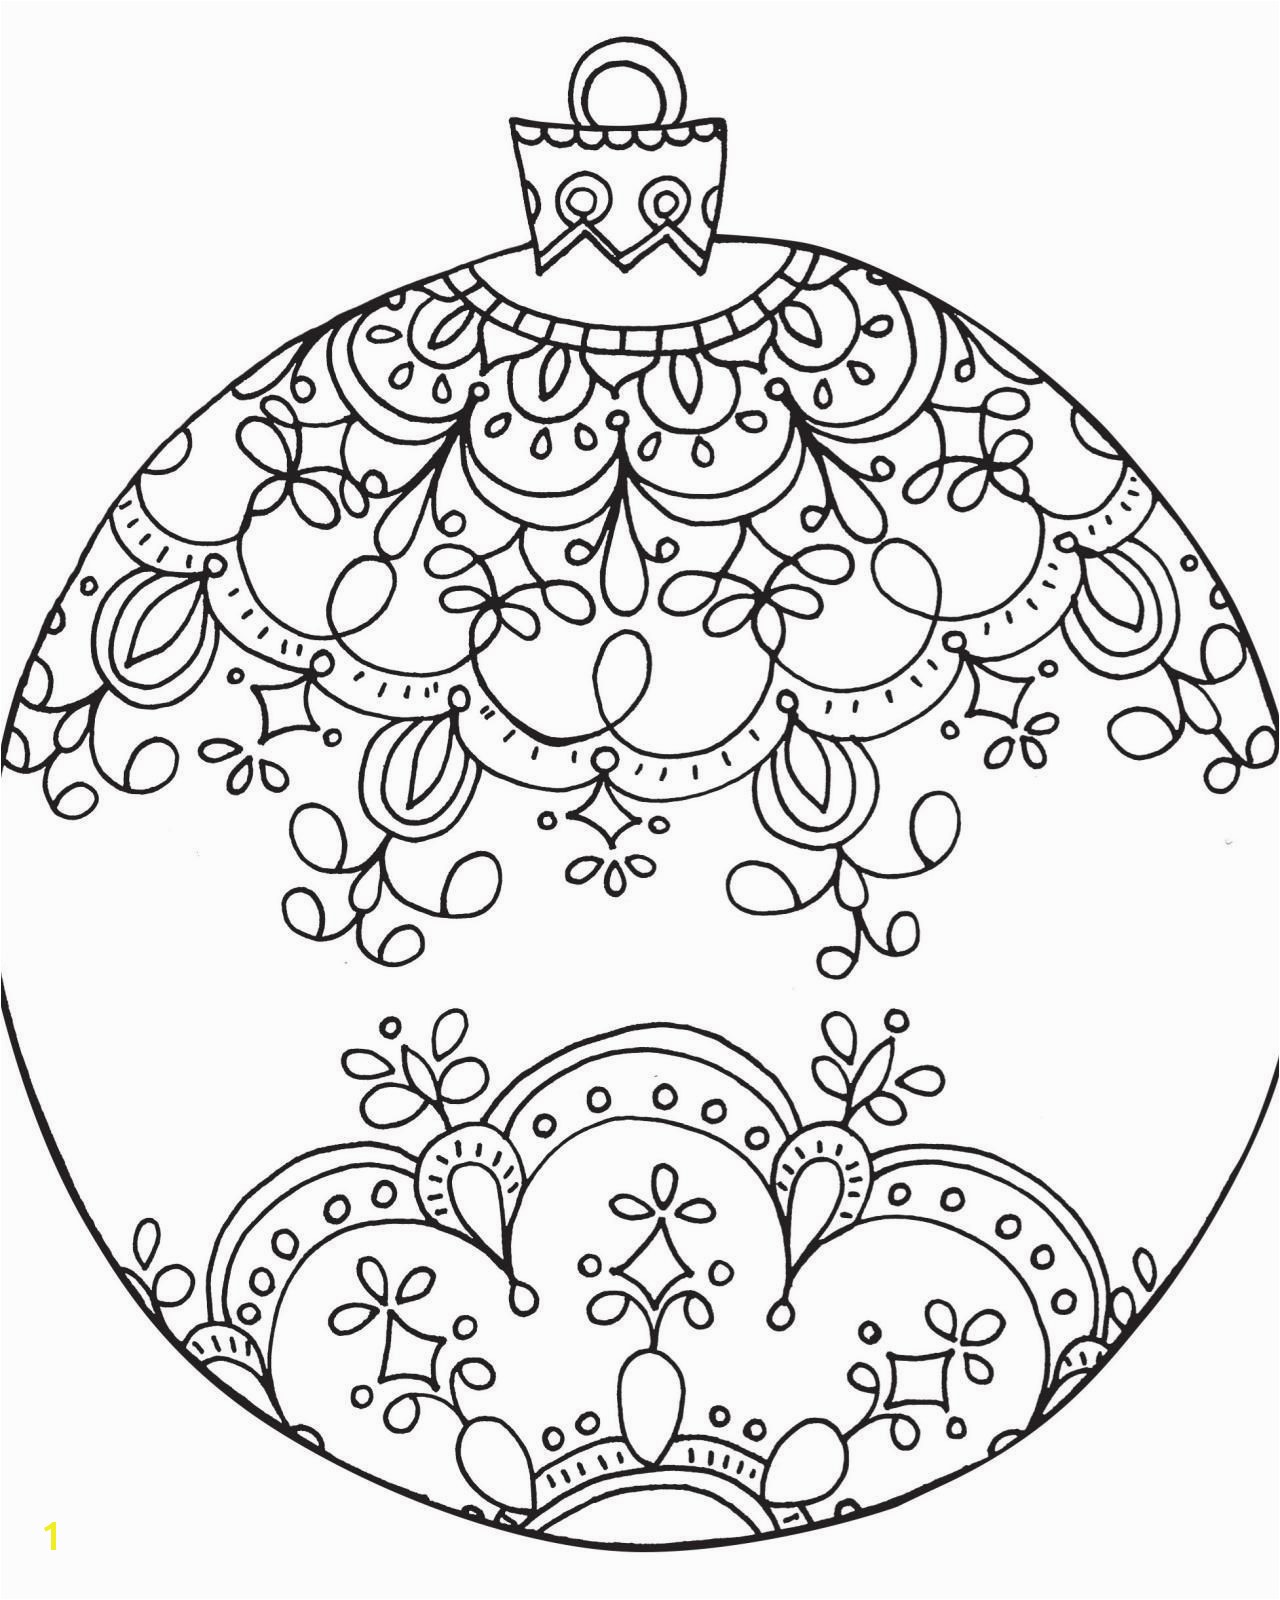 New England Patriots Logo Coloring Pages 13 Luxury New England Patriots Coloring Pages Pics